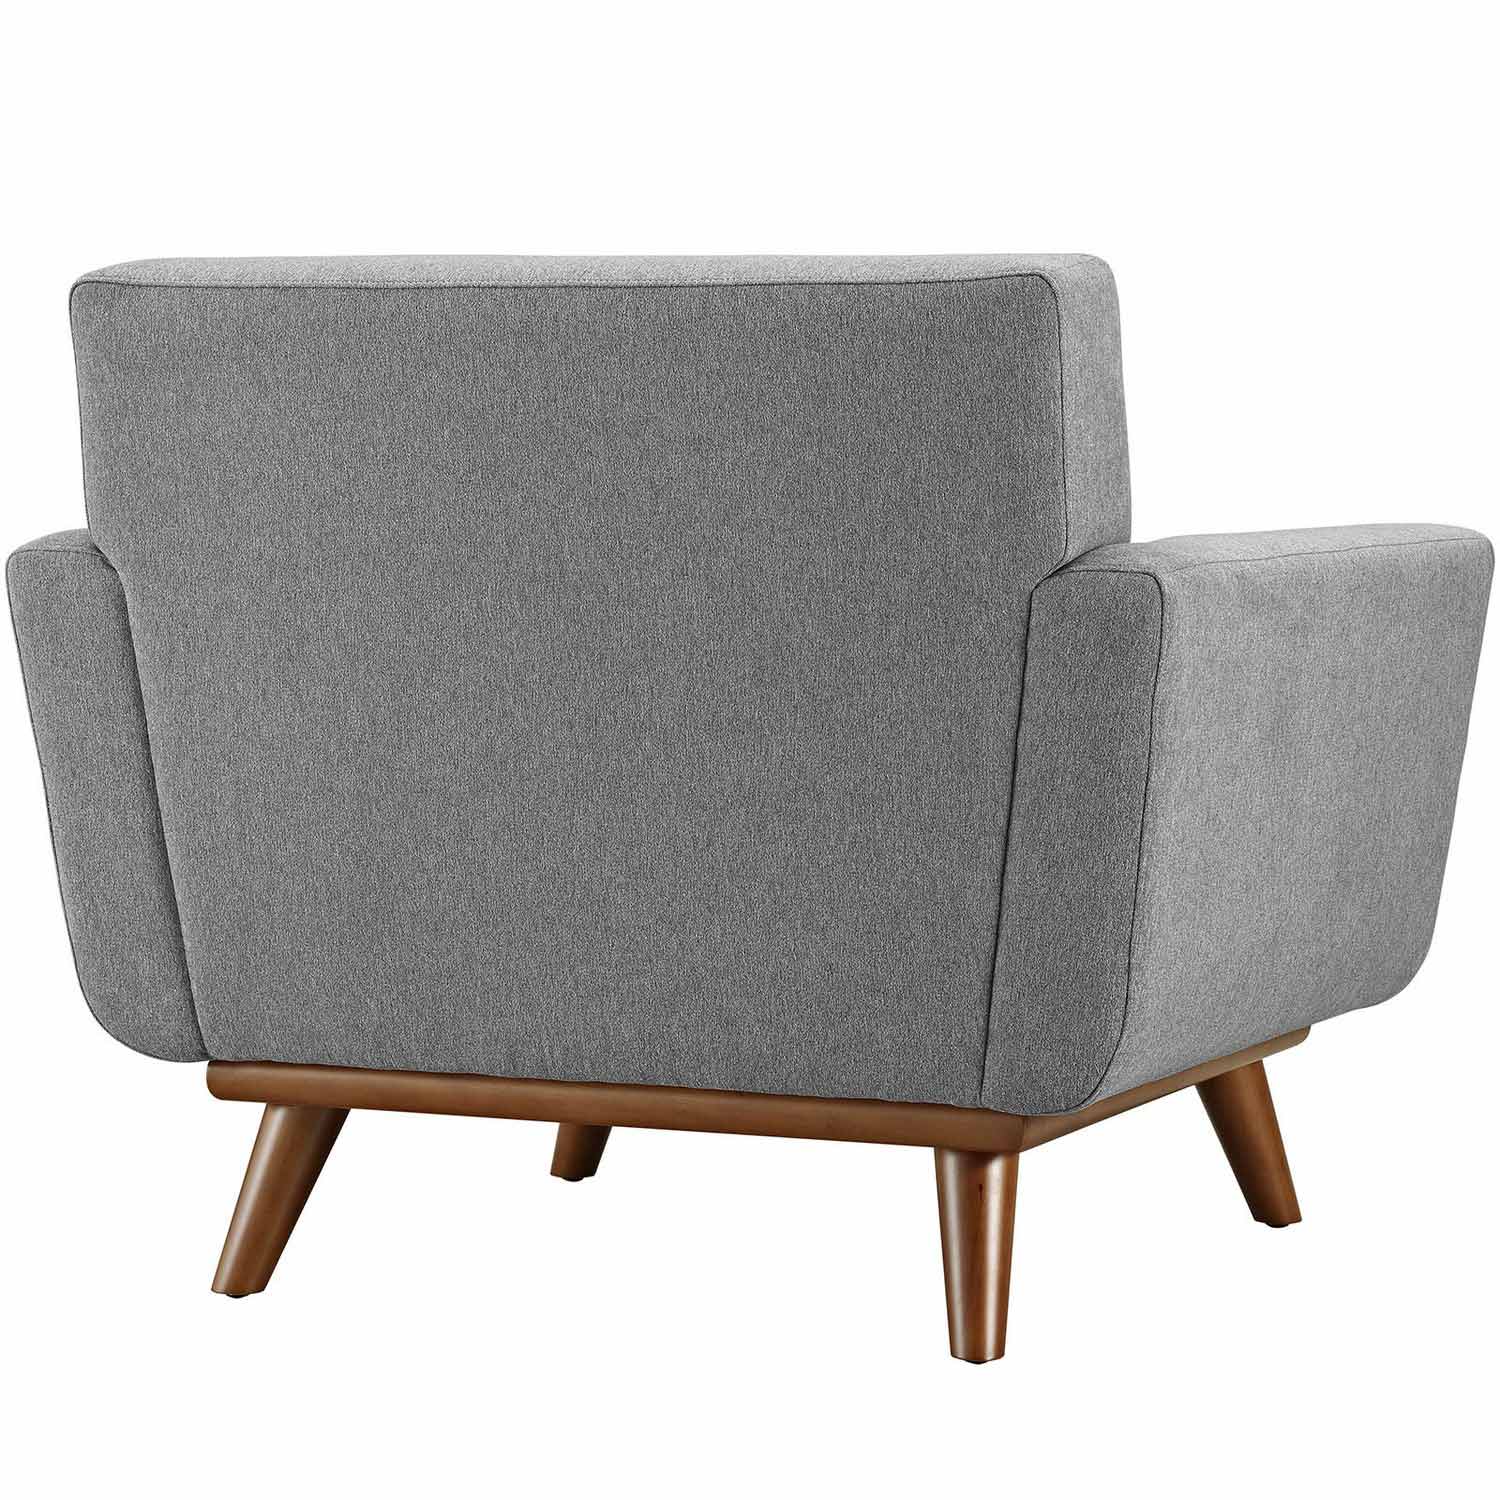 Modway Engage Upholstered Armchair - Expectation Gray